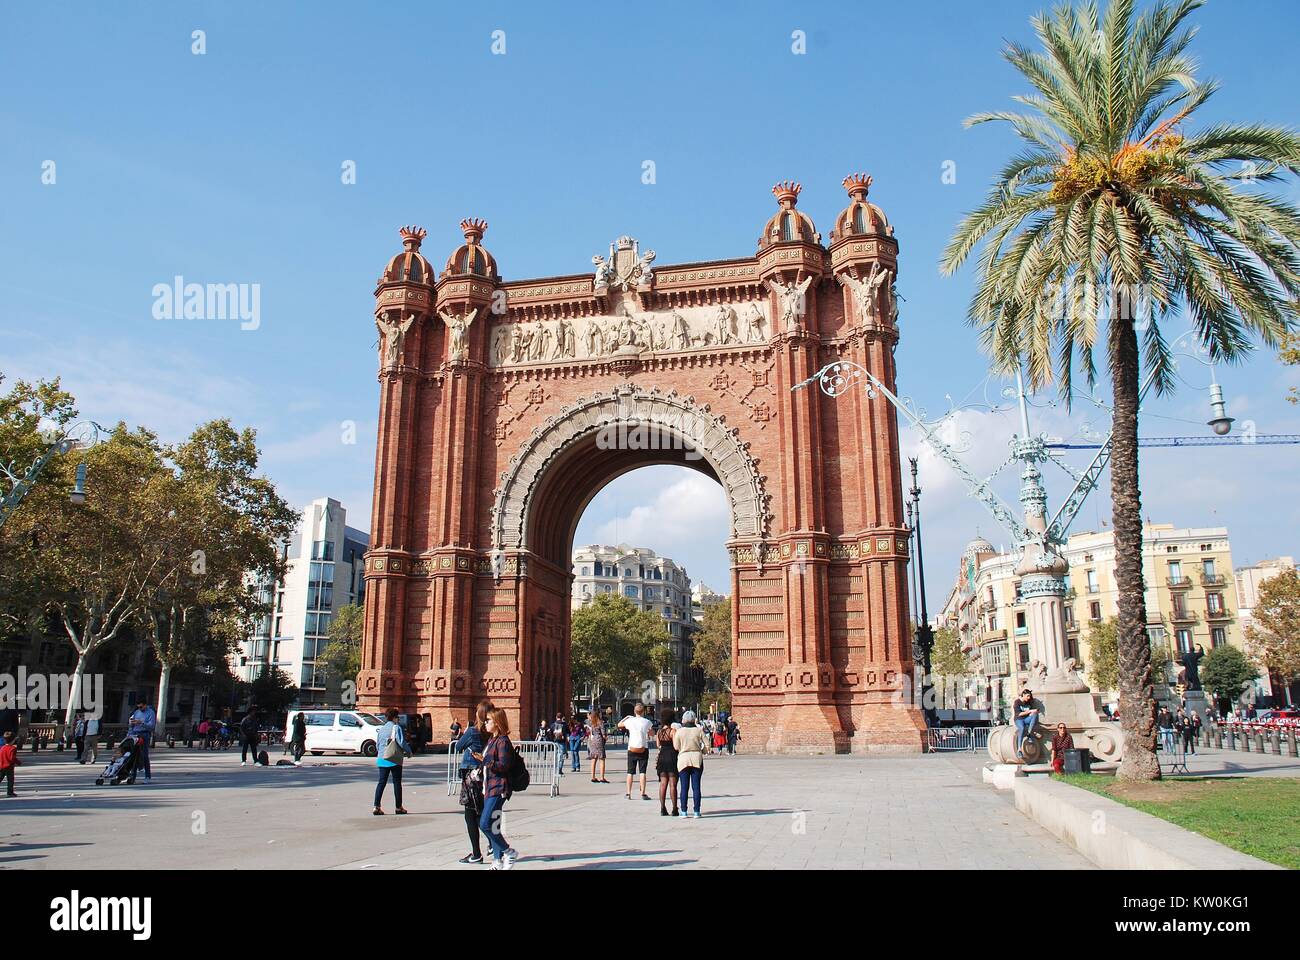 The historic Arc de Triomf in Barcelona, Spain on November 1, 2017. It was built in 1888 as the entrance to the Barcelona World Exposition. Stock Photo